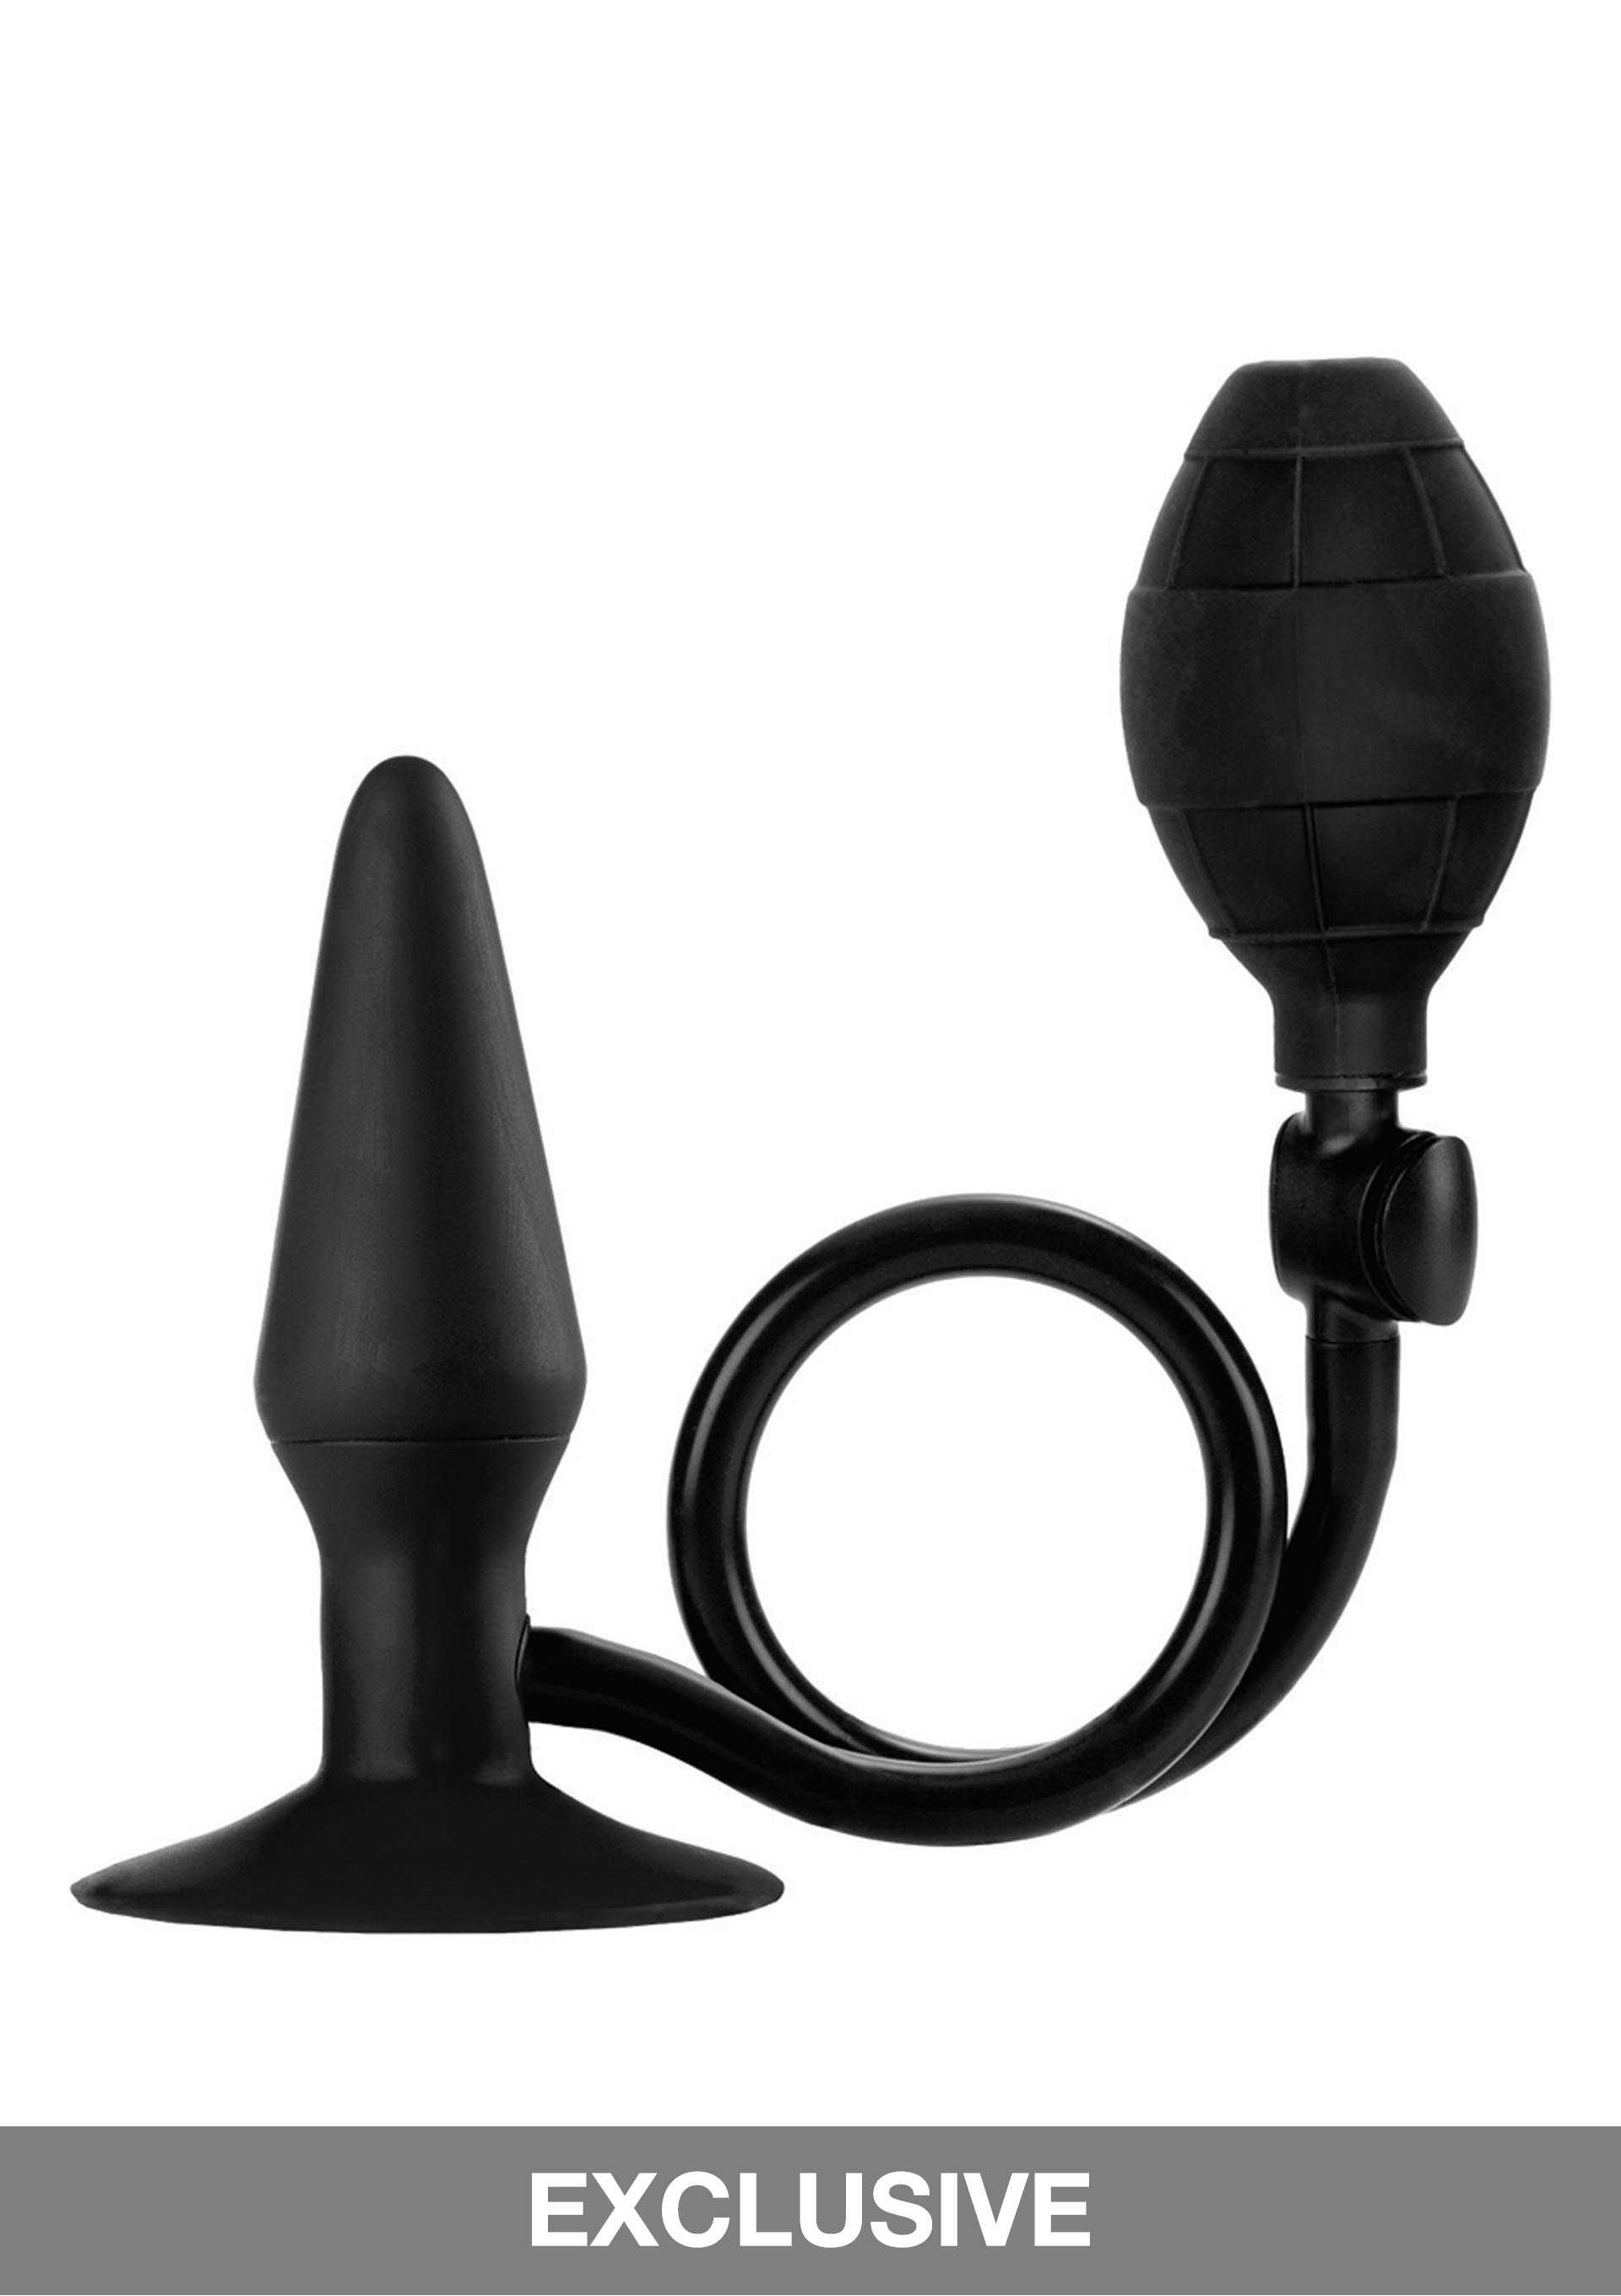 Plug anal gonflable : booty call pumper small noir